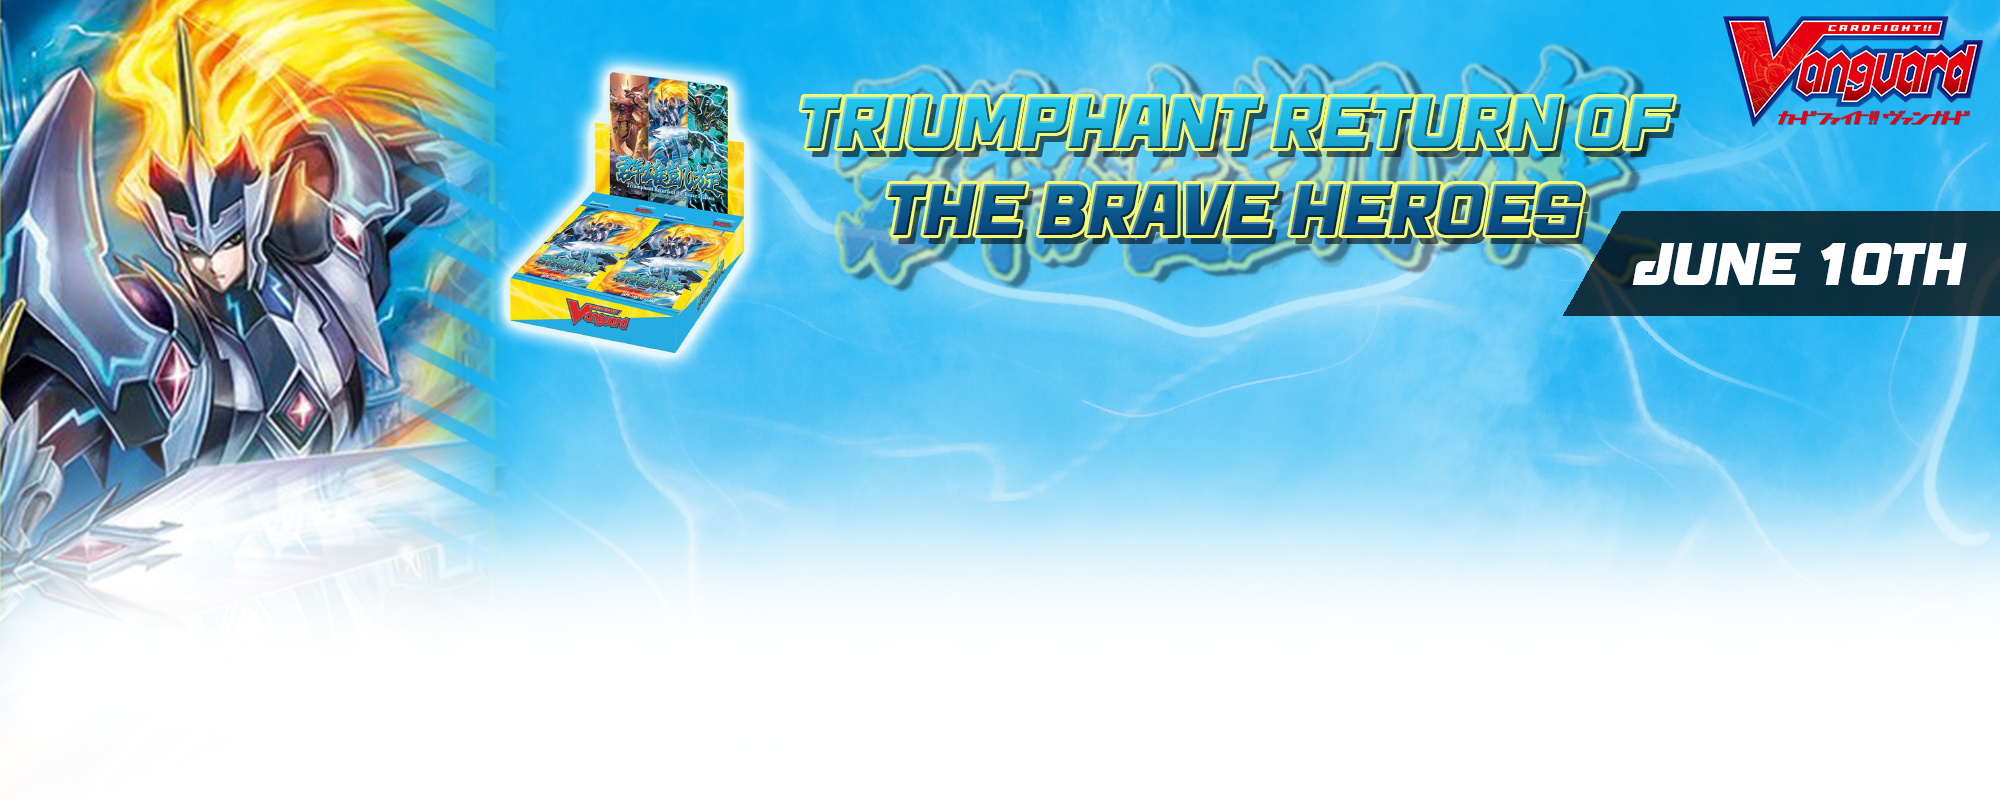 CFV Triumphant Return of the Brave Heroes